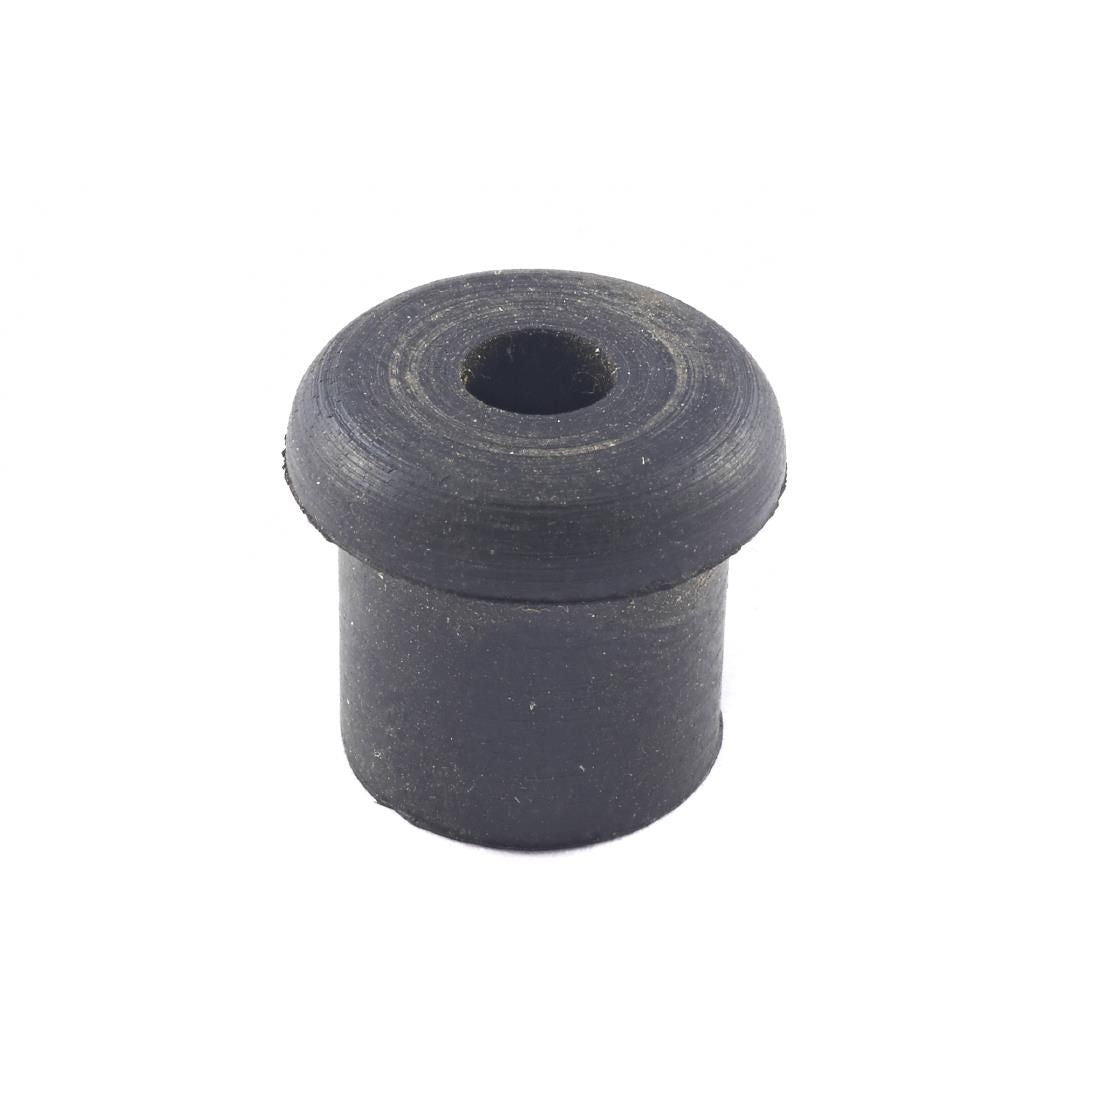 WA300 Foot (New Style) Part Number 024645